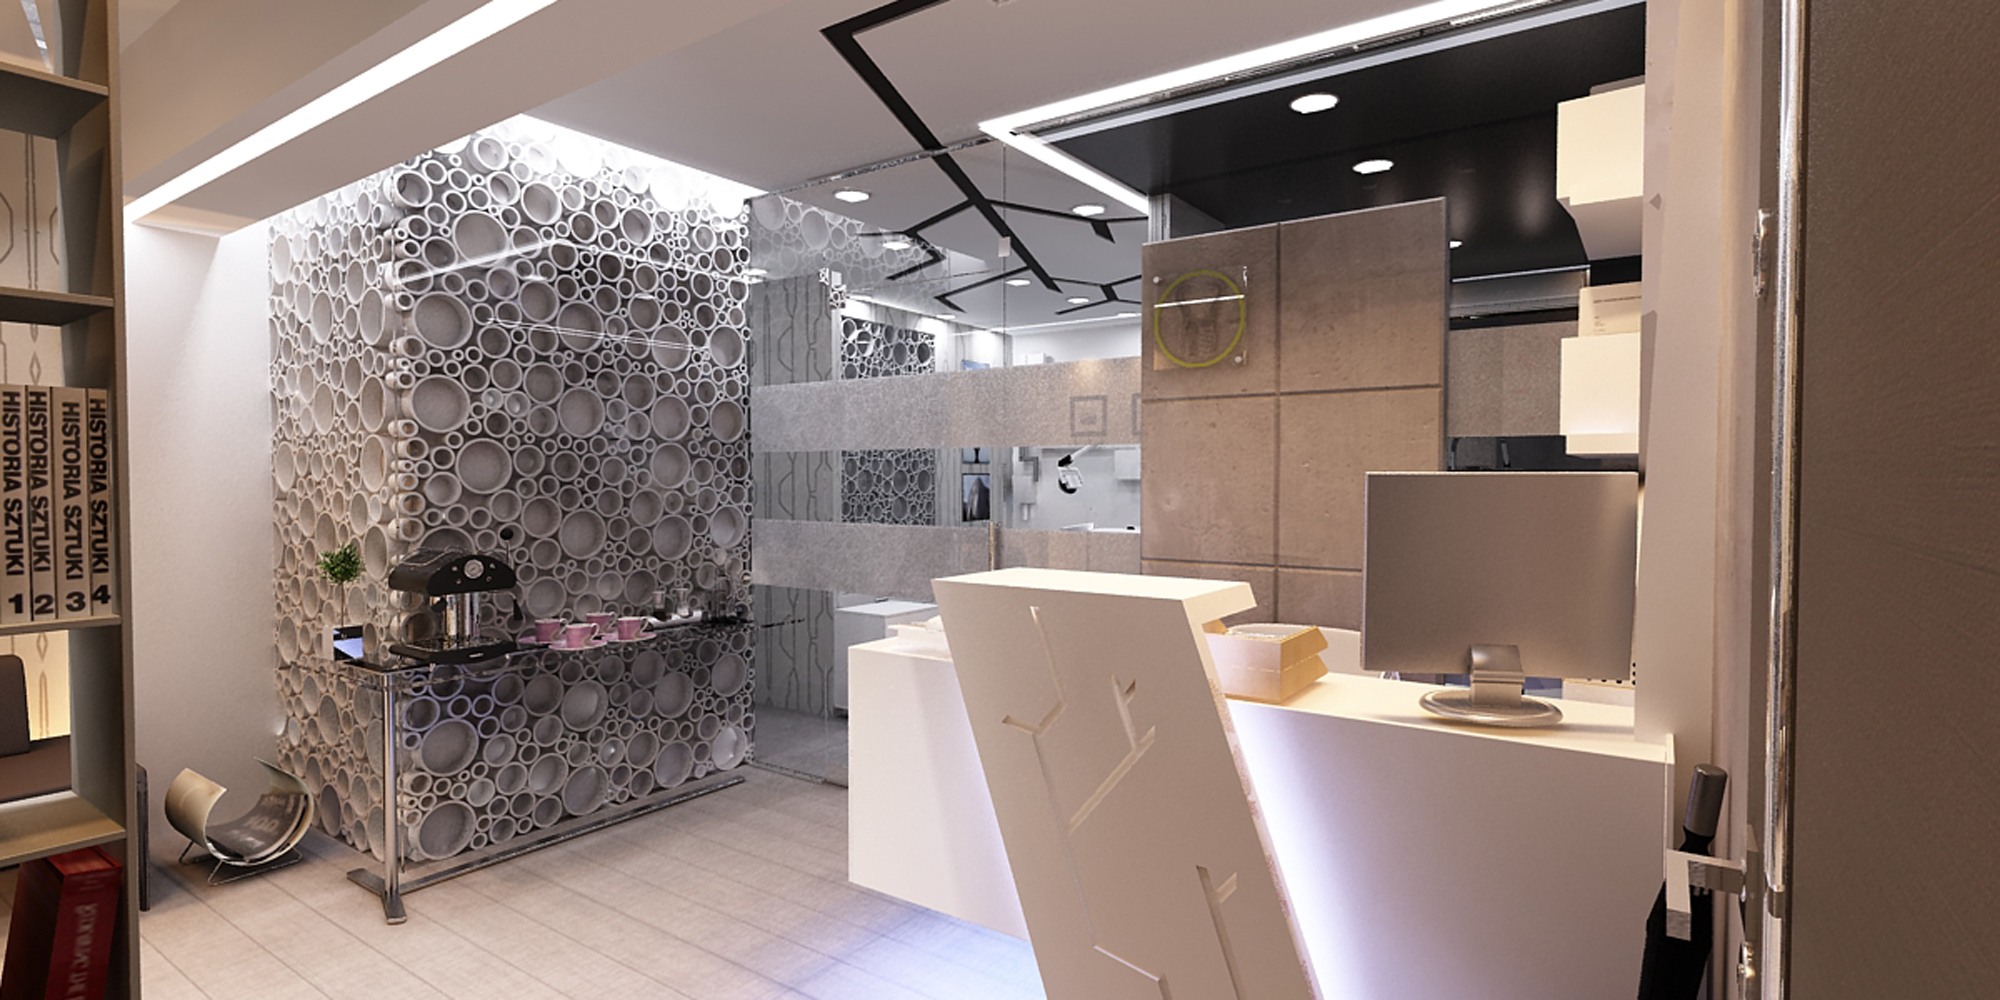 Small dental clinic | George Papadopoulos Design in spaces